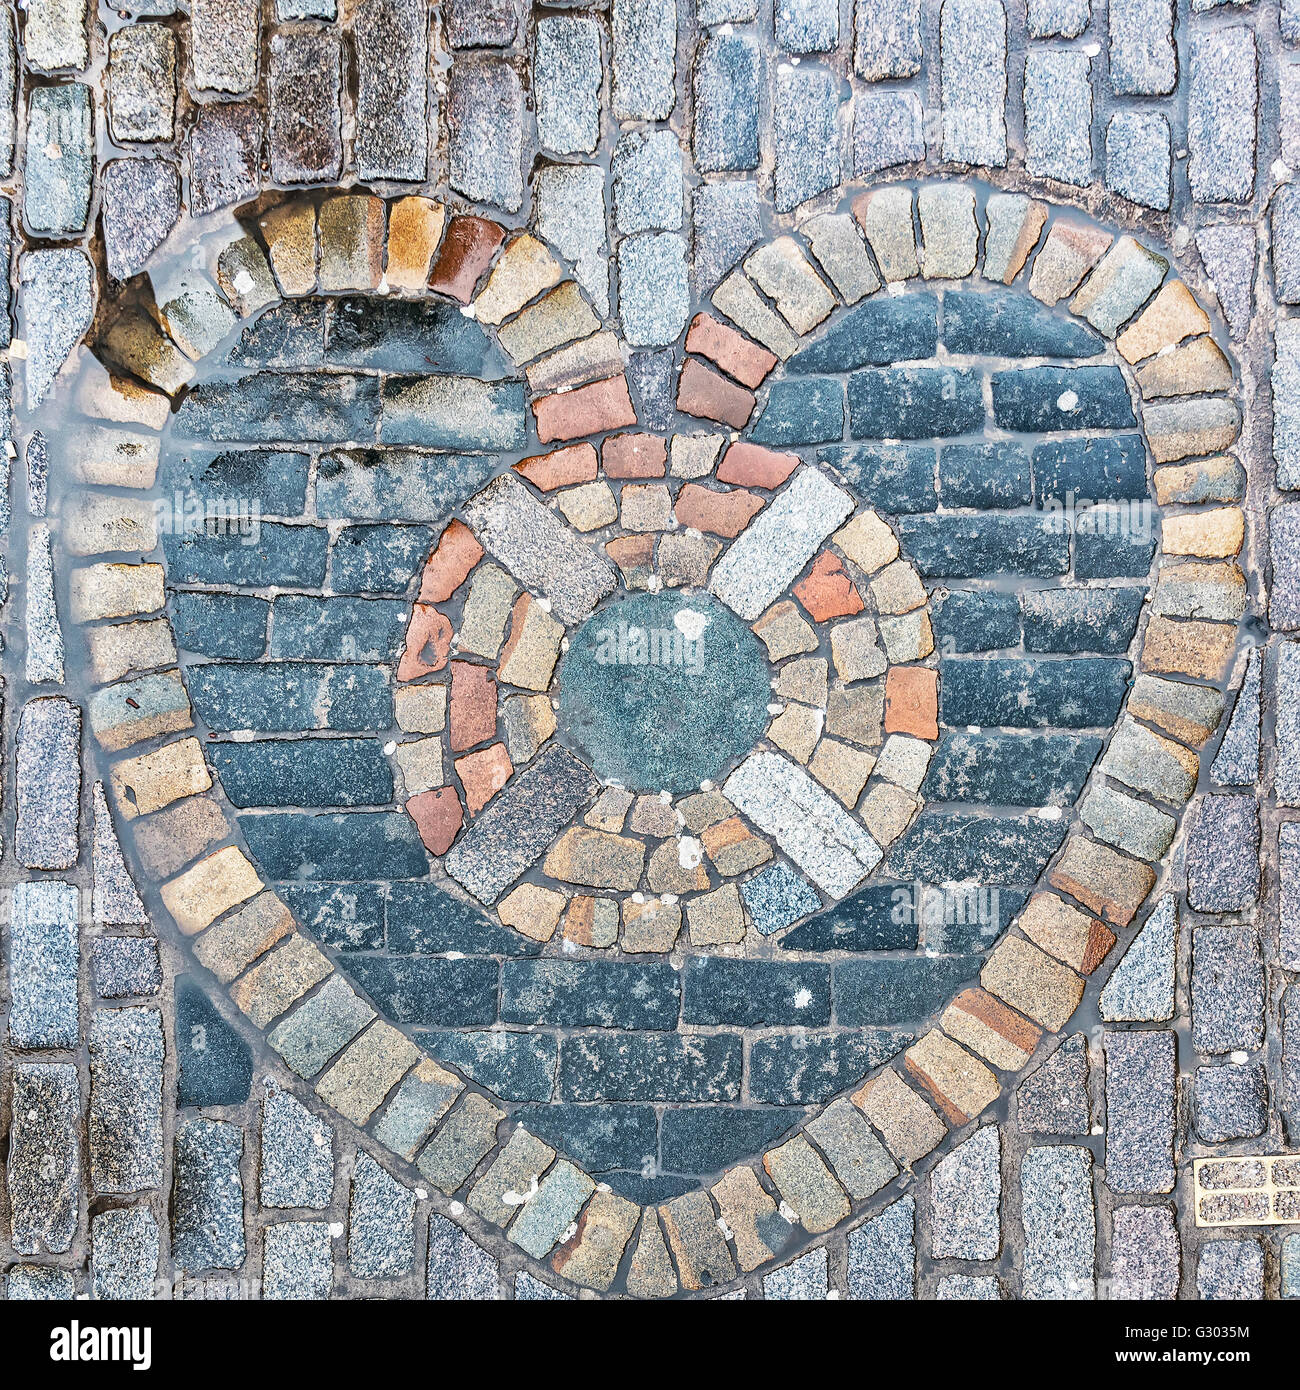 The Heart of Midlothian, built into the cobblestones of Edinburgh's Royal Mile in the nineteenth century. It is considered good Stock Photo